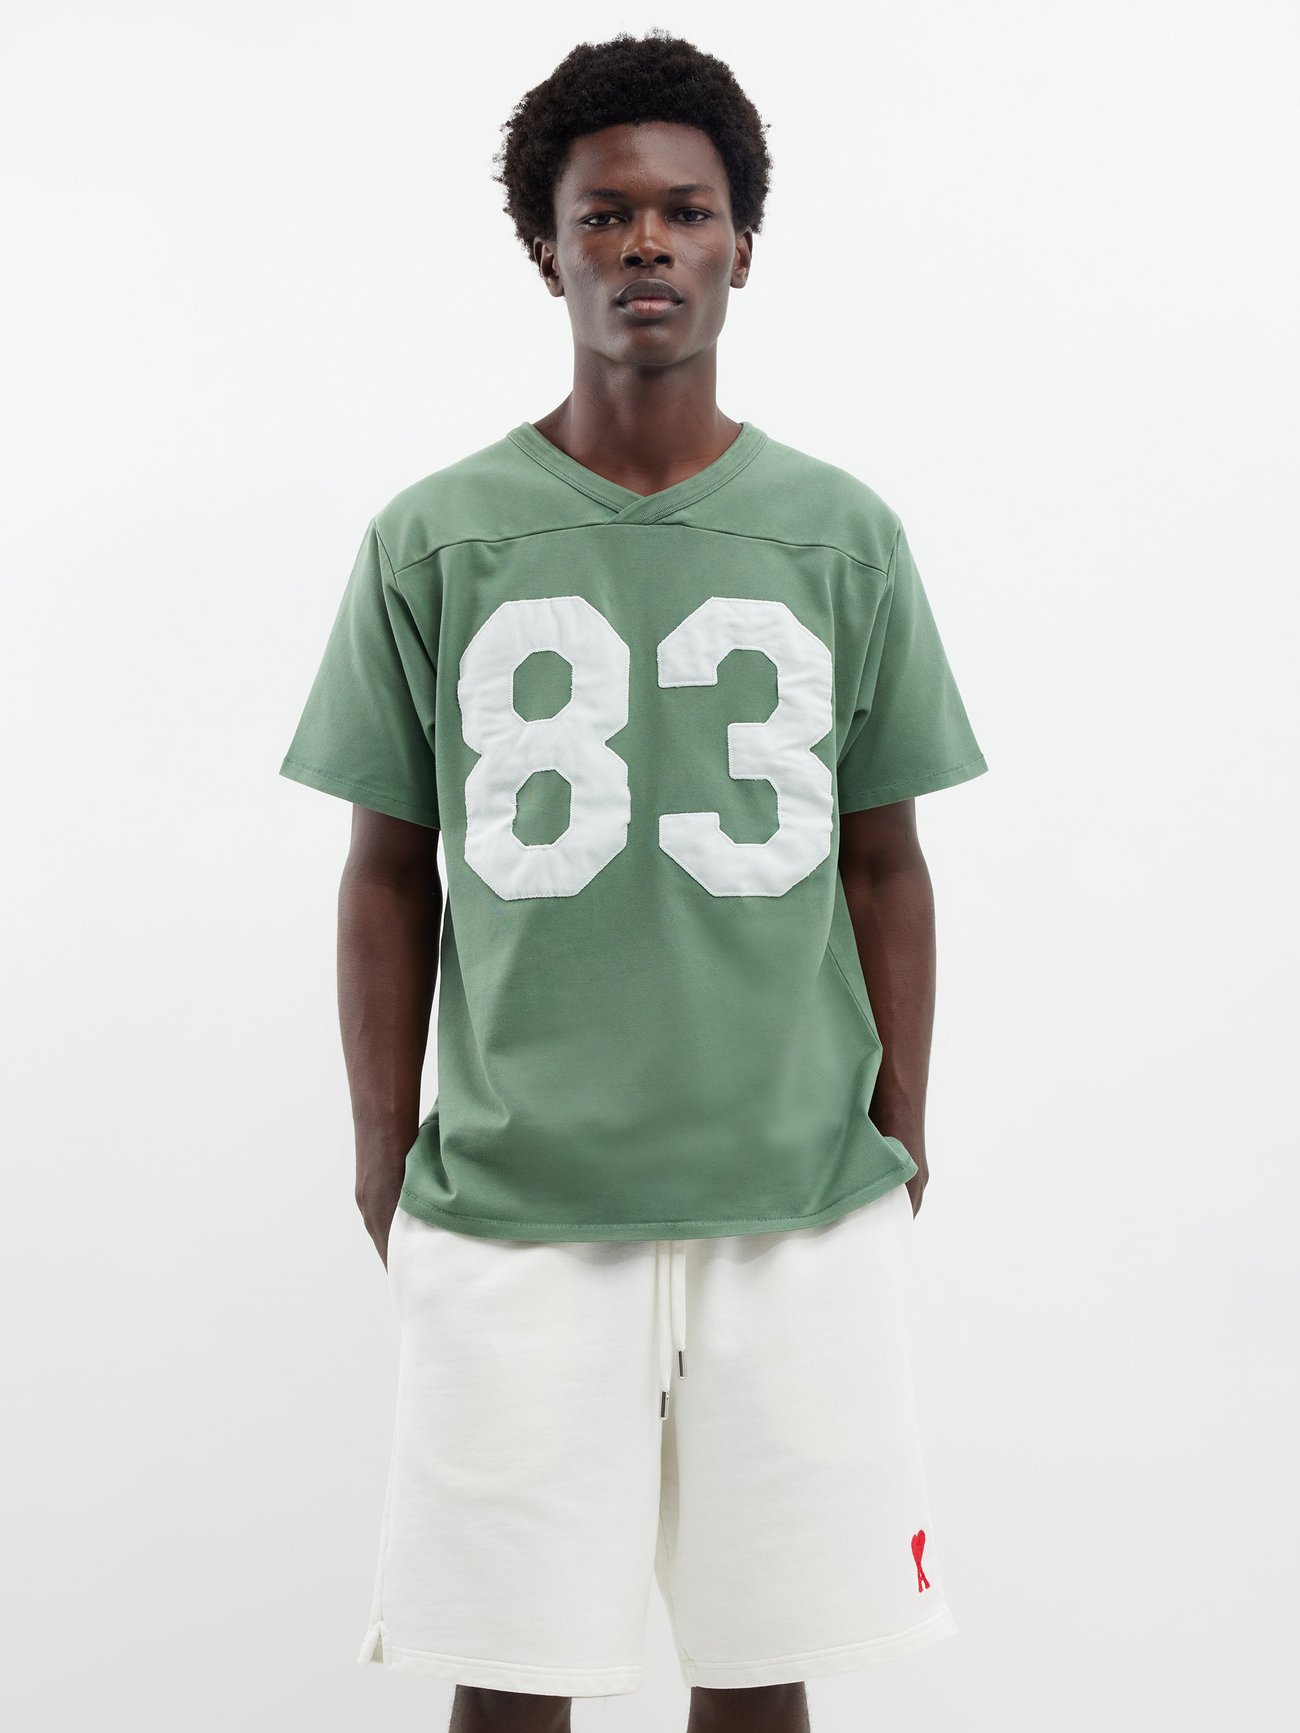 Football jersey T shirt - Clothes & Accessories Icons